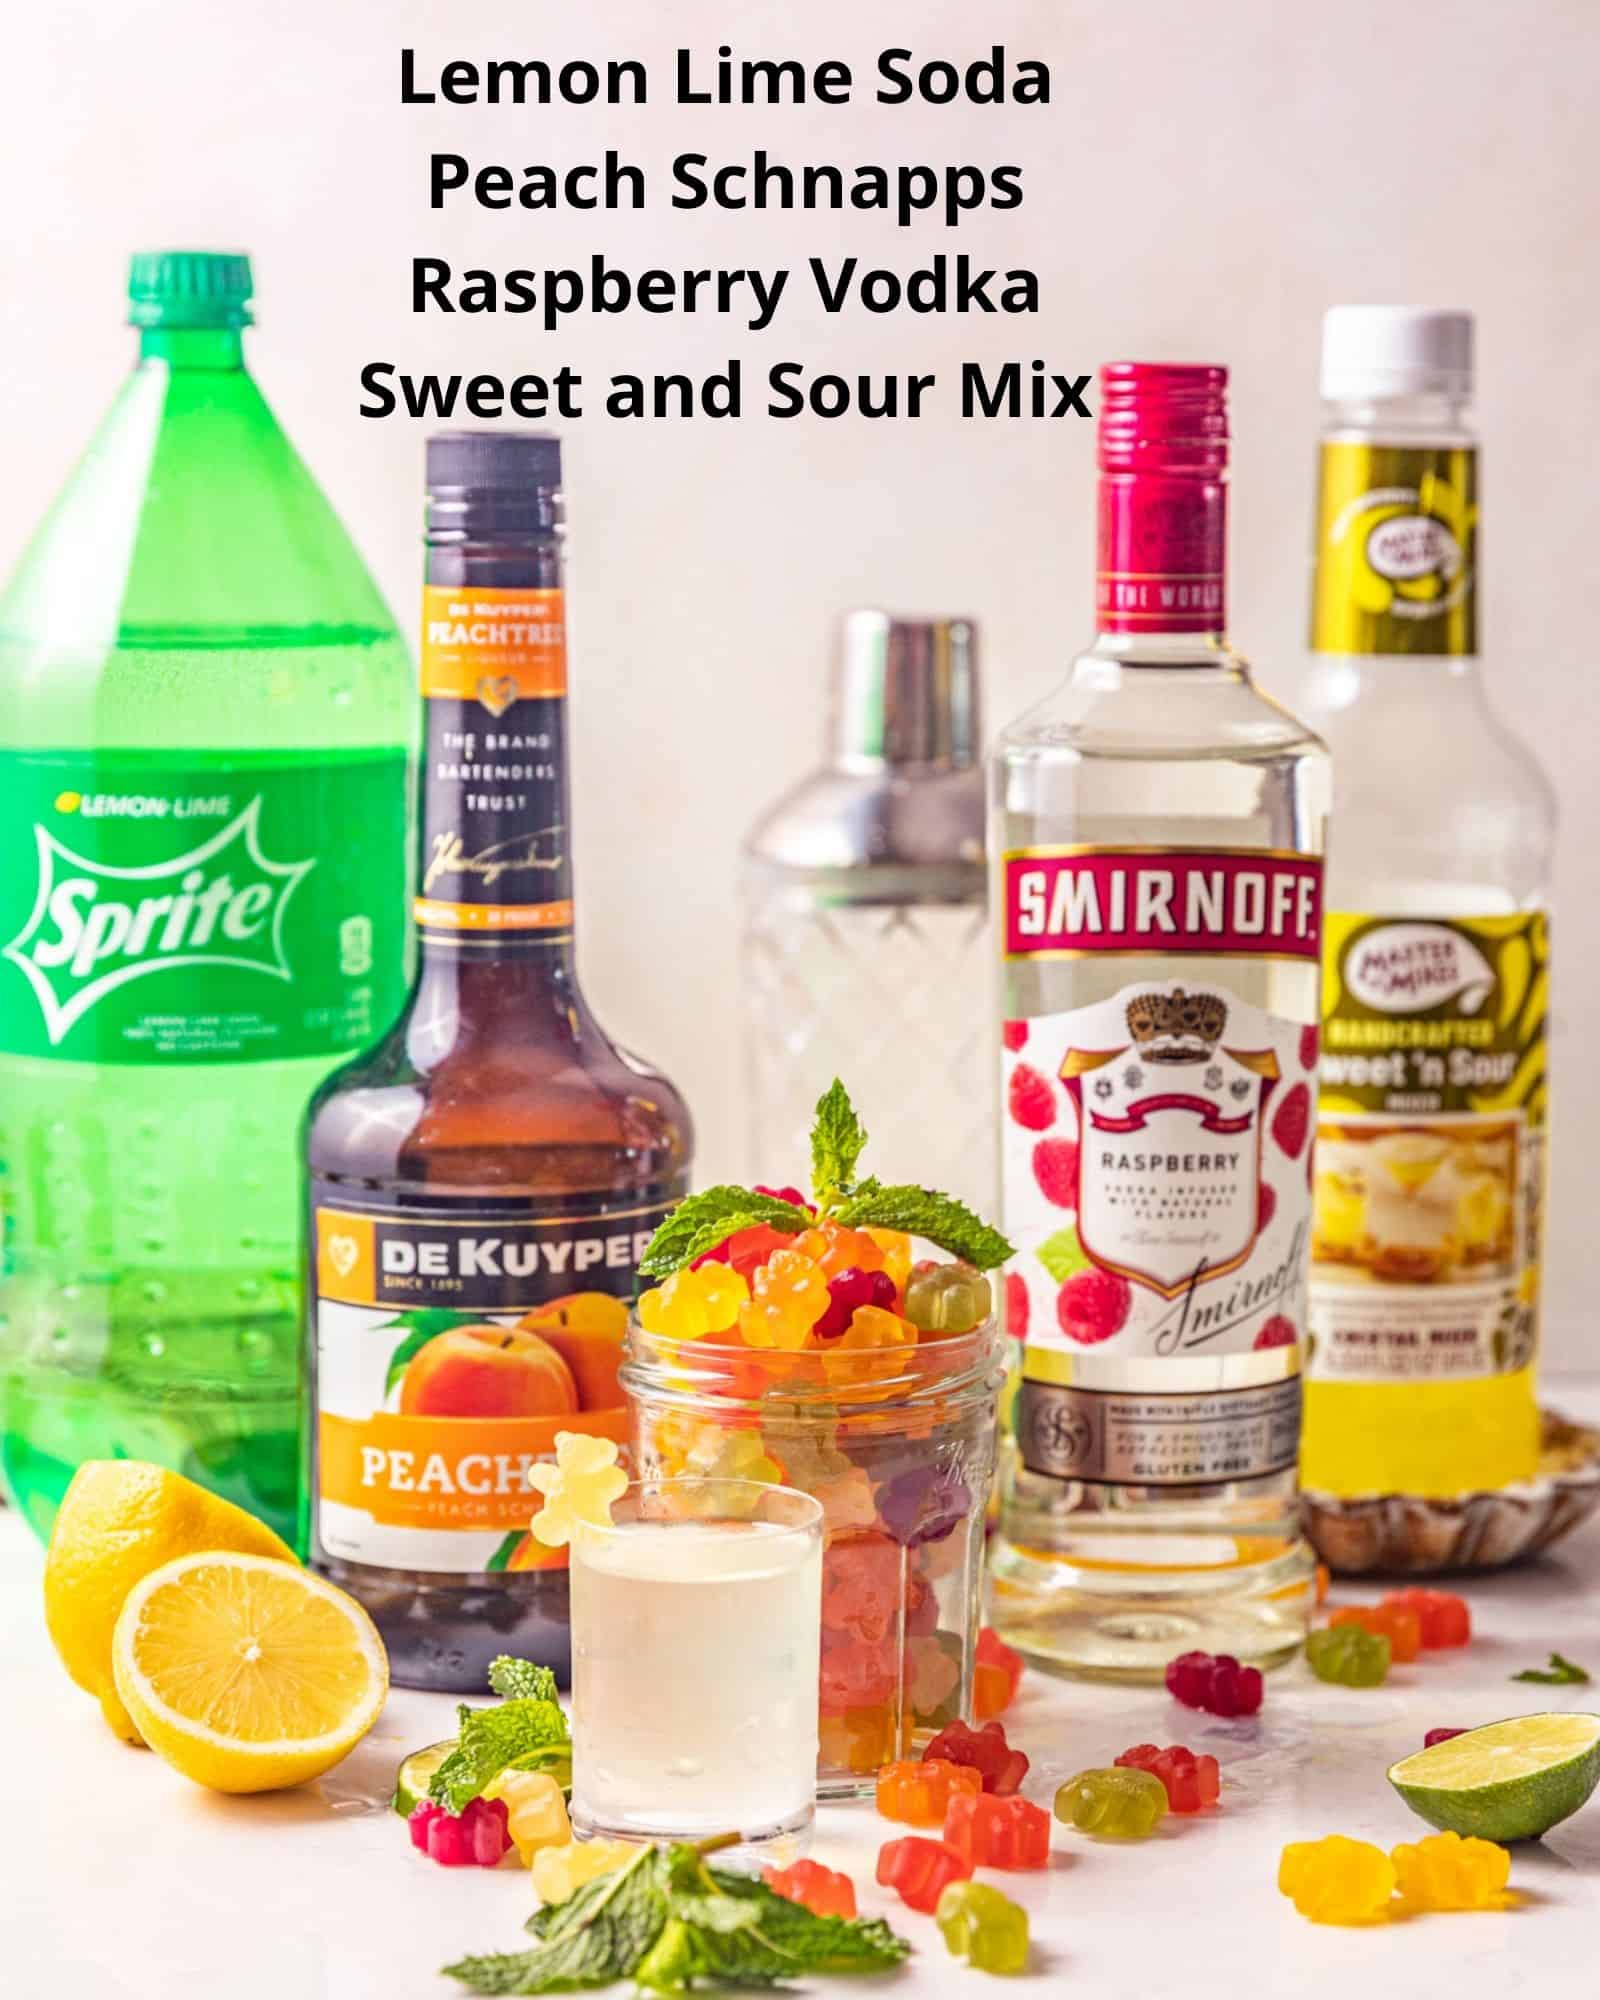 Ingredients needed to make white gummy bear shot - lemon lime soda, peach schnapps, raspberry vodka, and sweet and sour mix.